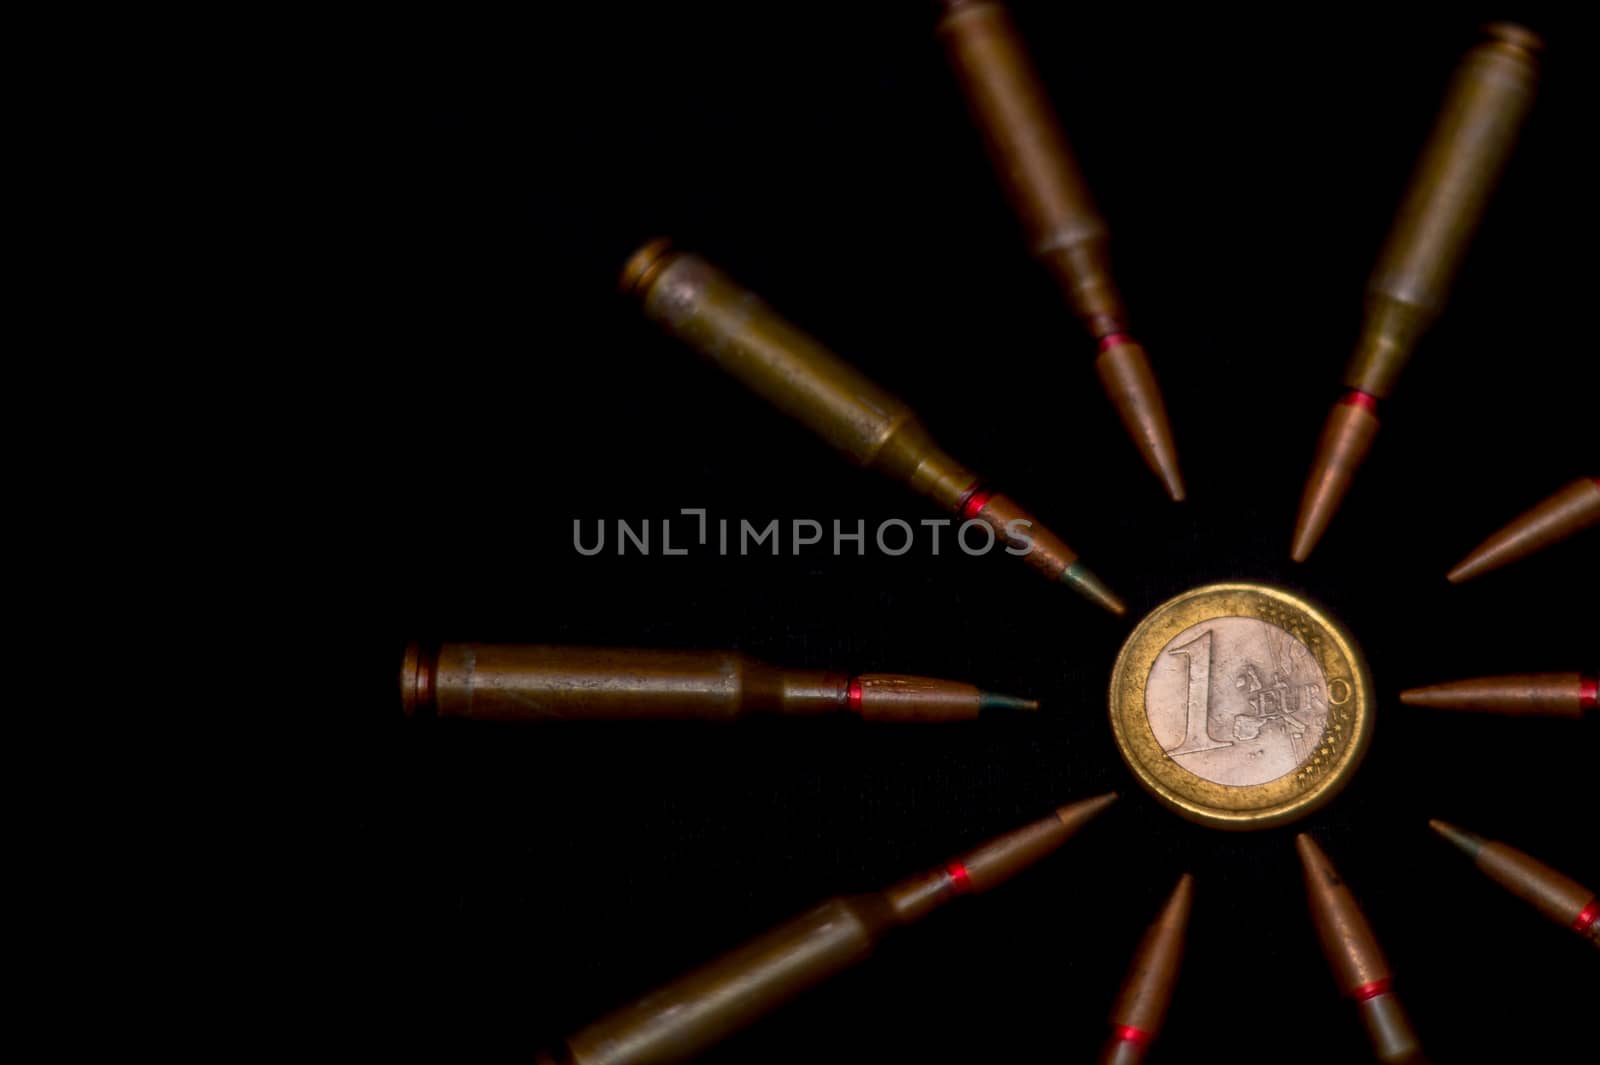 Rifle ammo around one euro coin on black background. Symbolizes the war for money and one of the world's problems. by alexsdriver